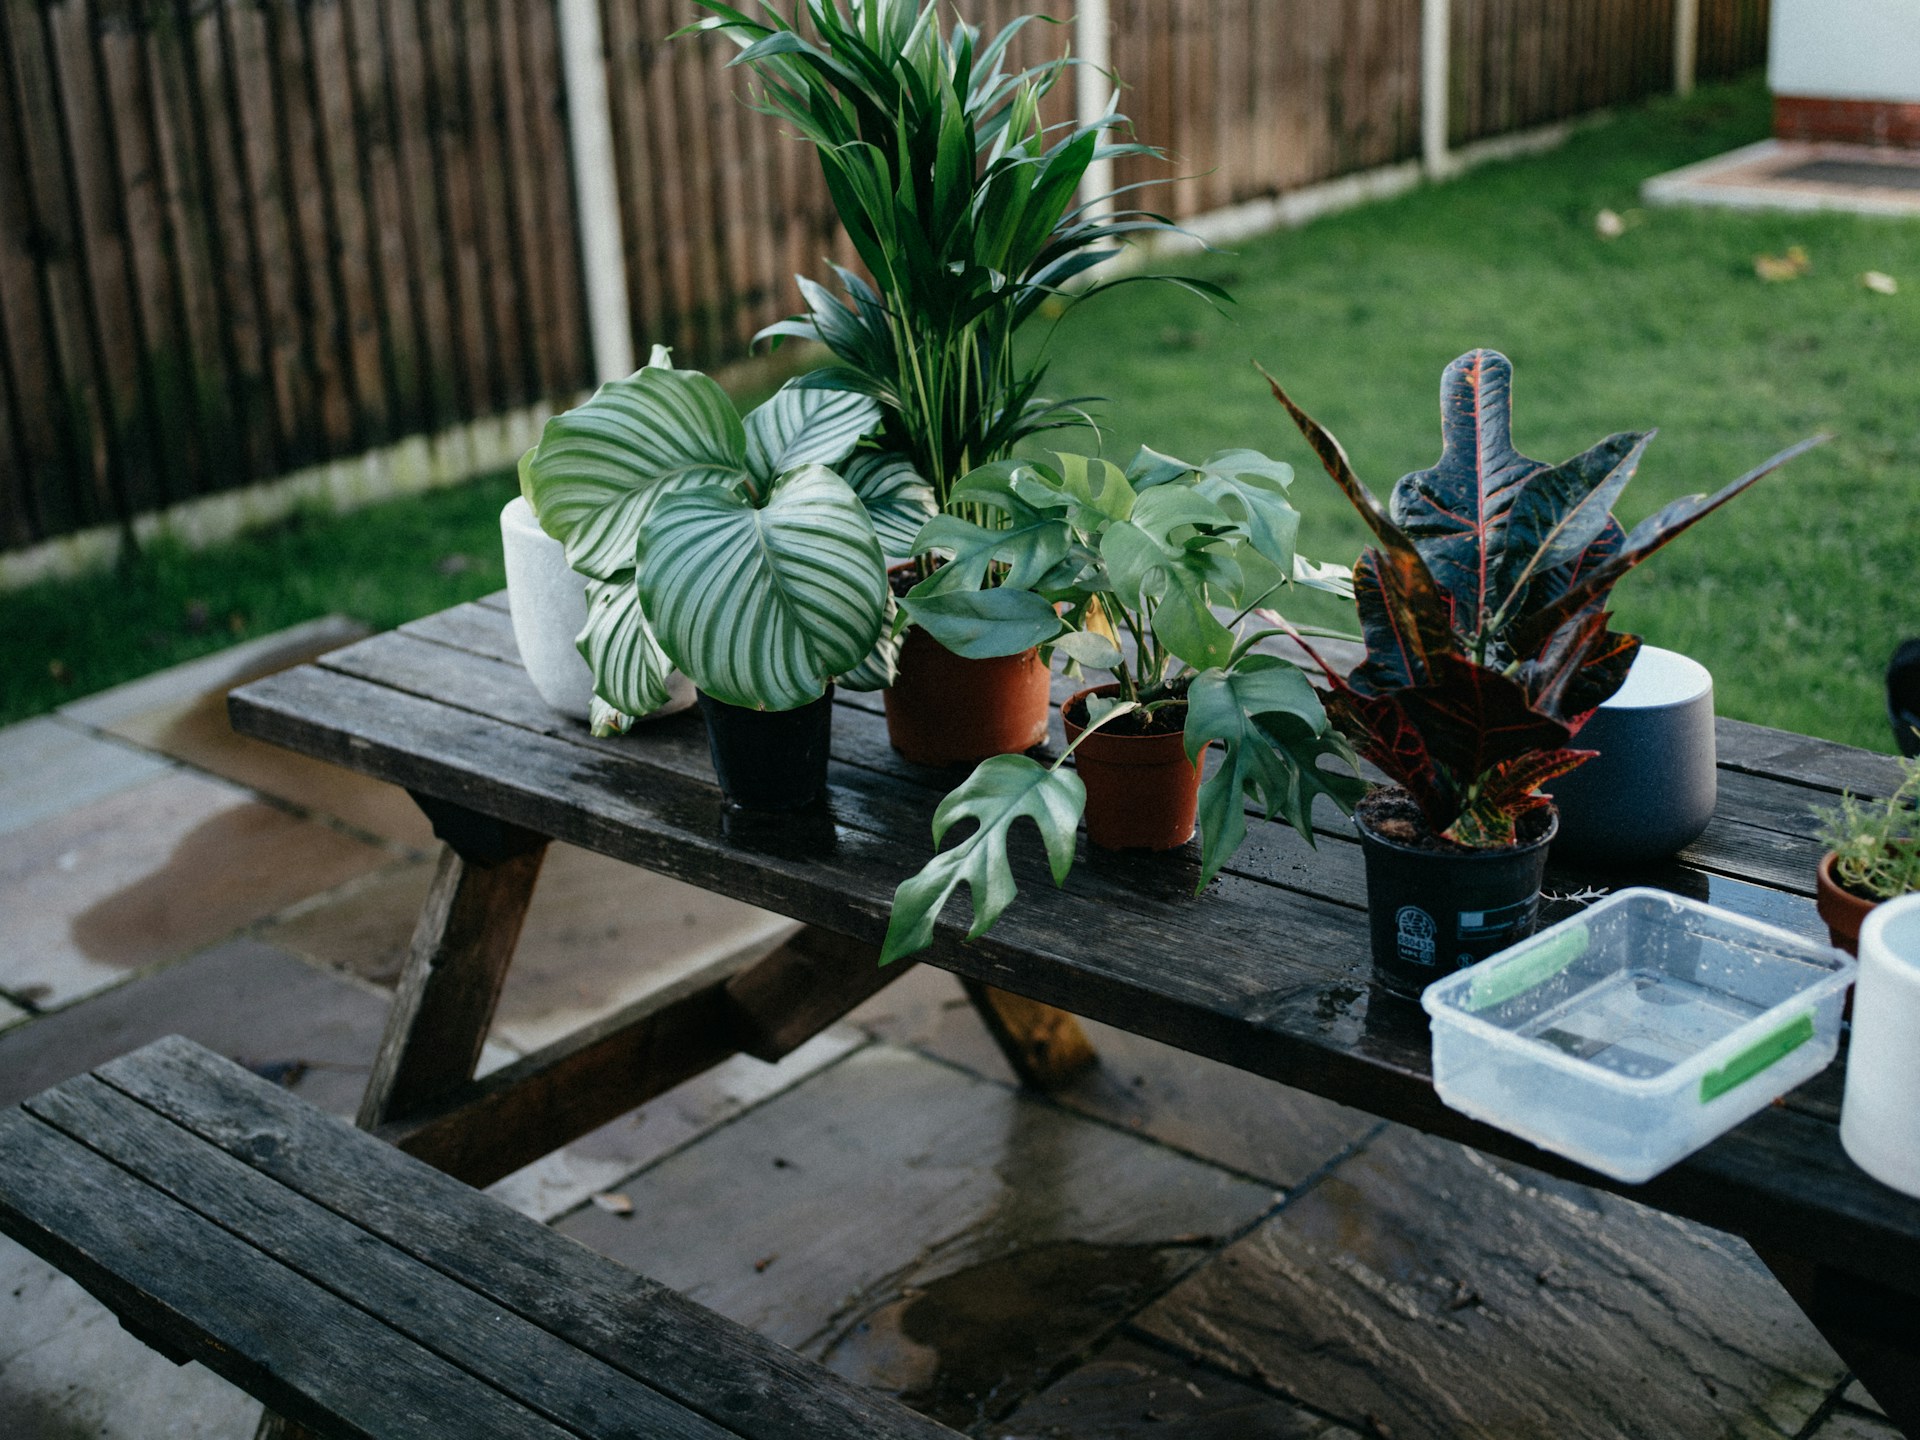 Outdoor picnic table with lots of plants